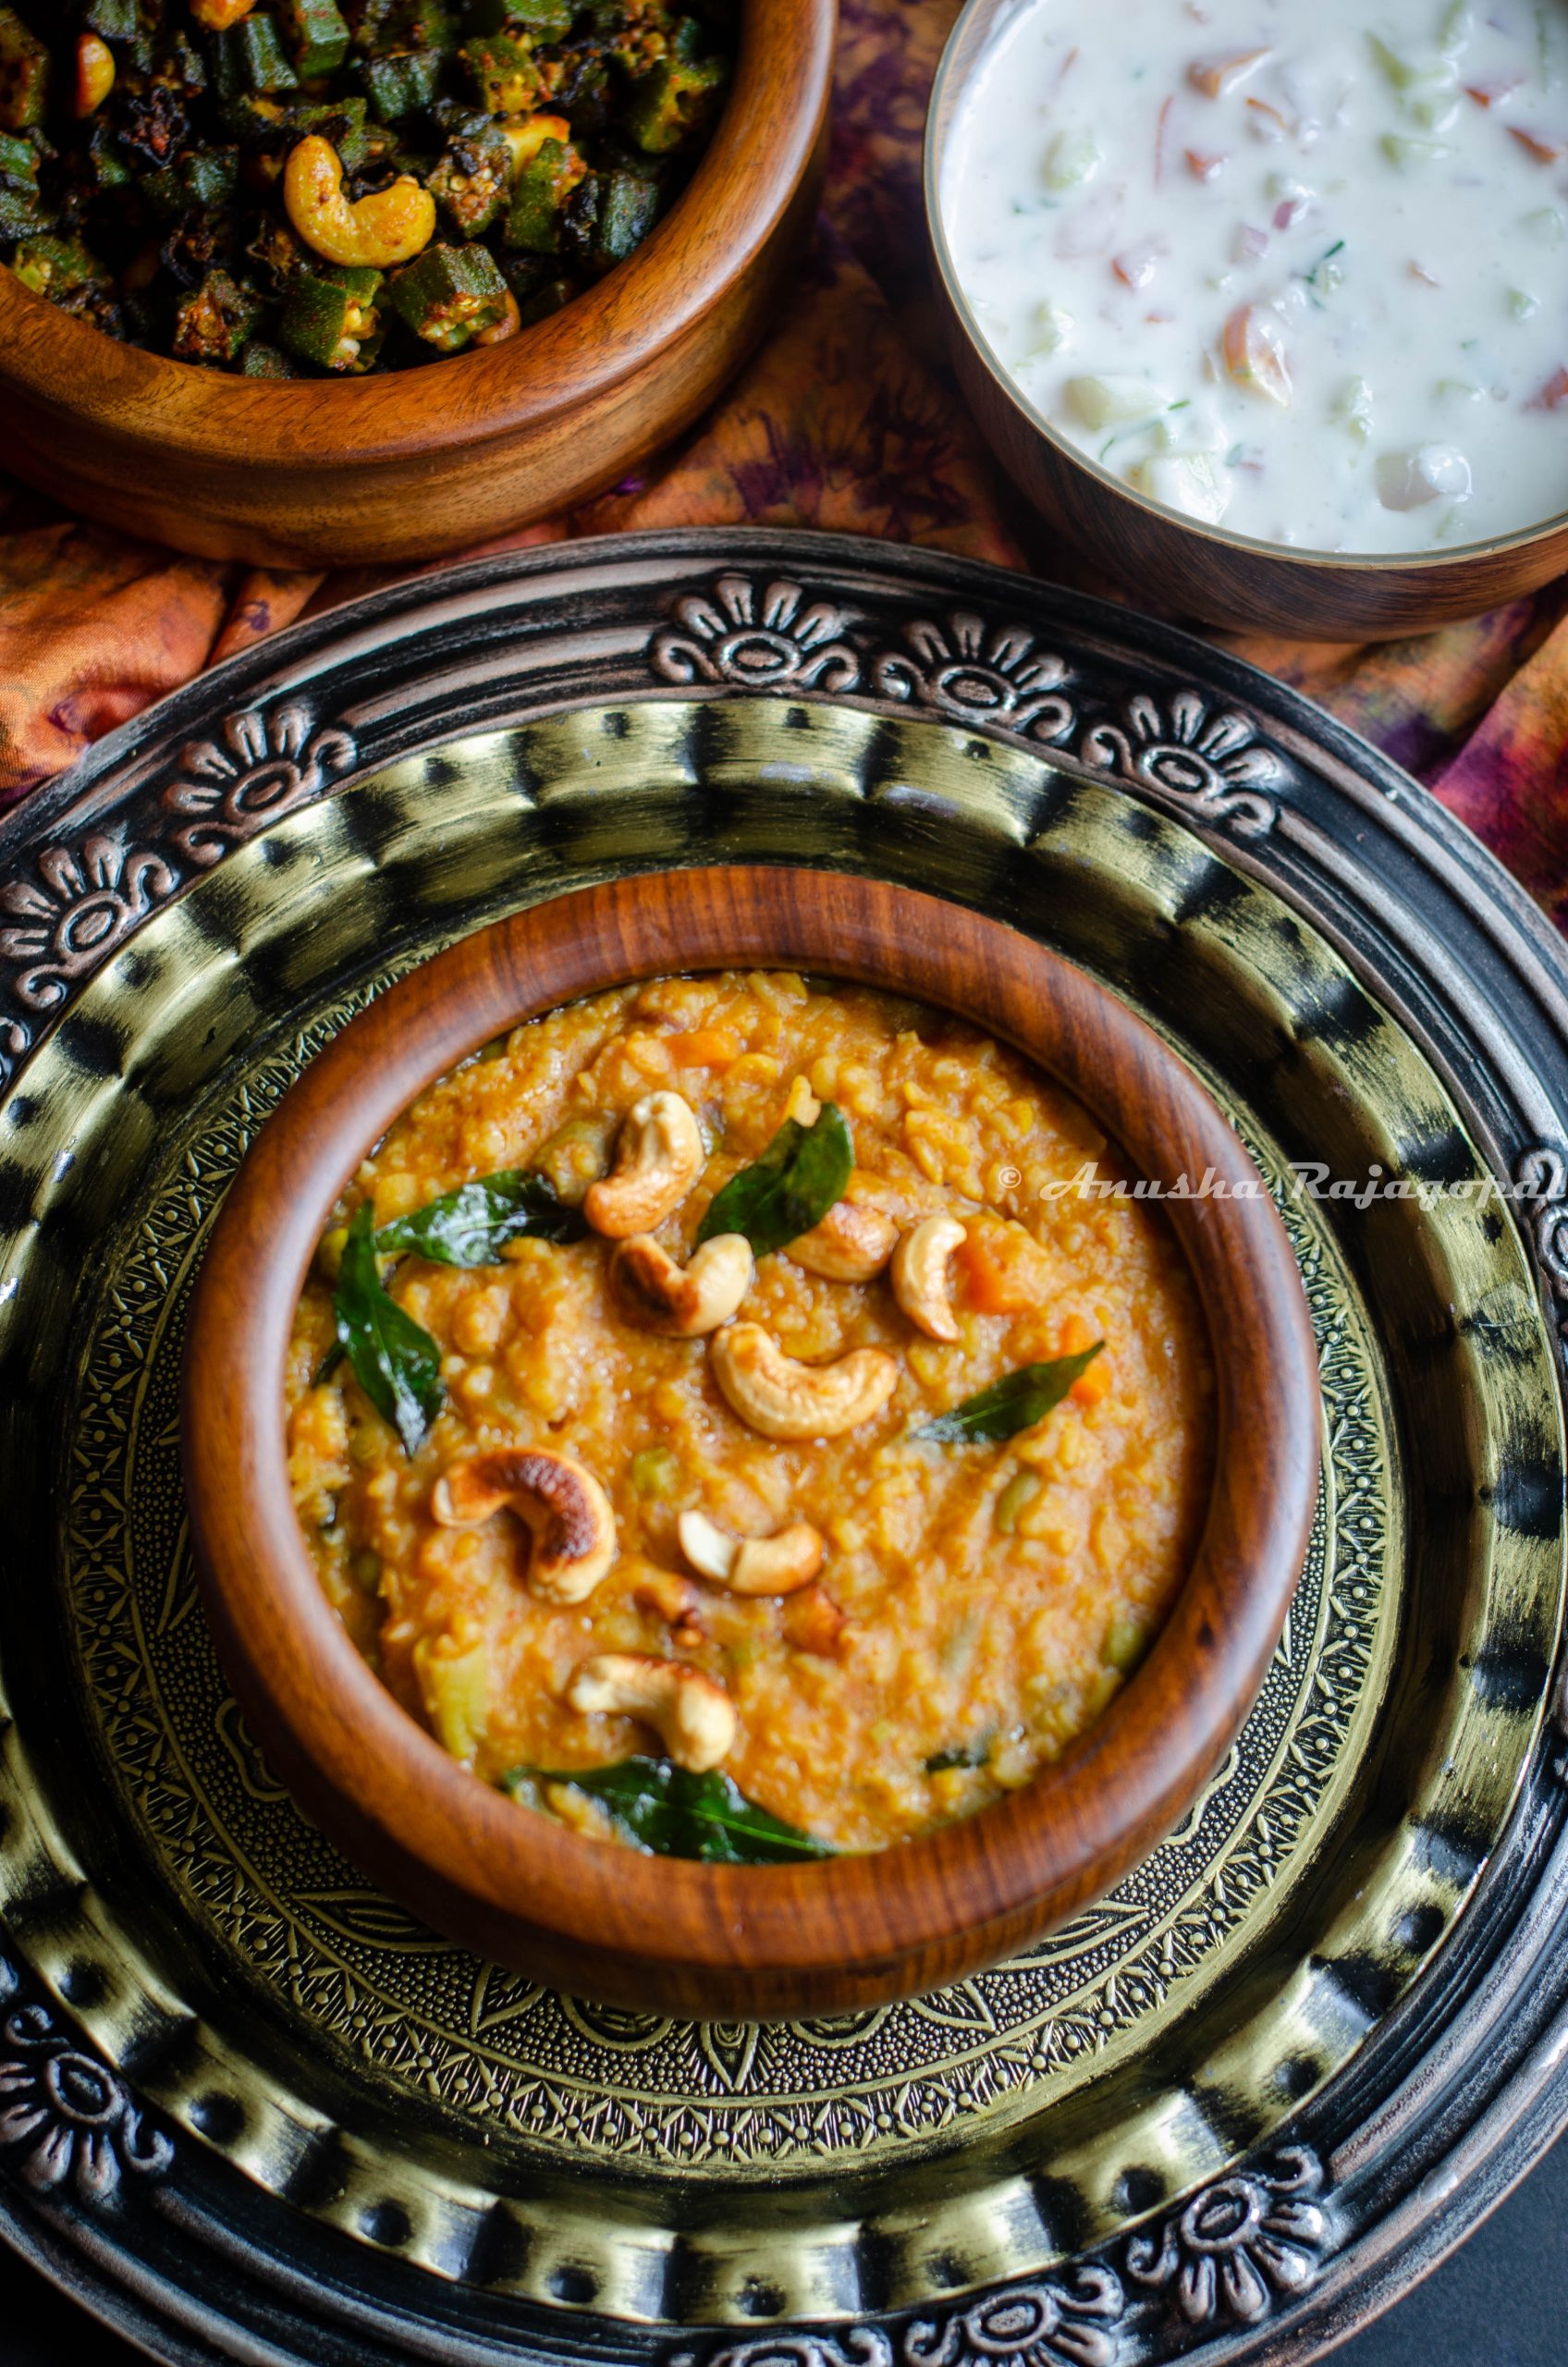 Instant Pot Bisi Bele Bath served in a wooden bowl with garnishing of curry leaves and cashews. The bowl is placed over an antique platter and is surrounded by bowls of raita and fried okra.